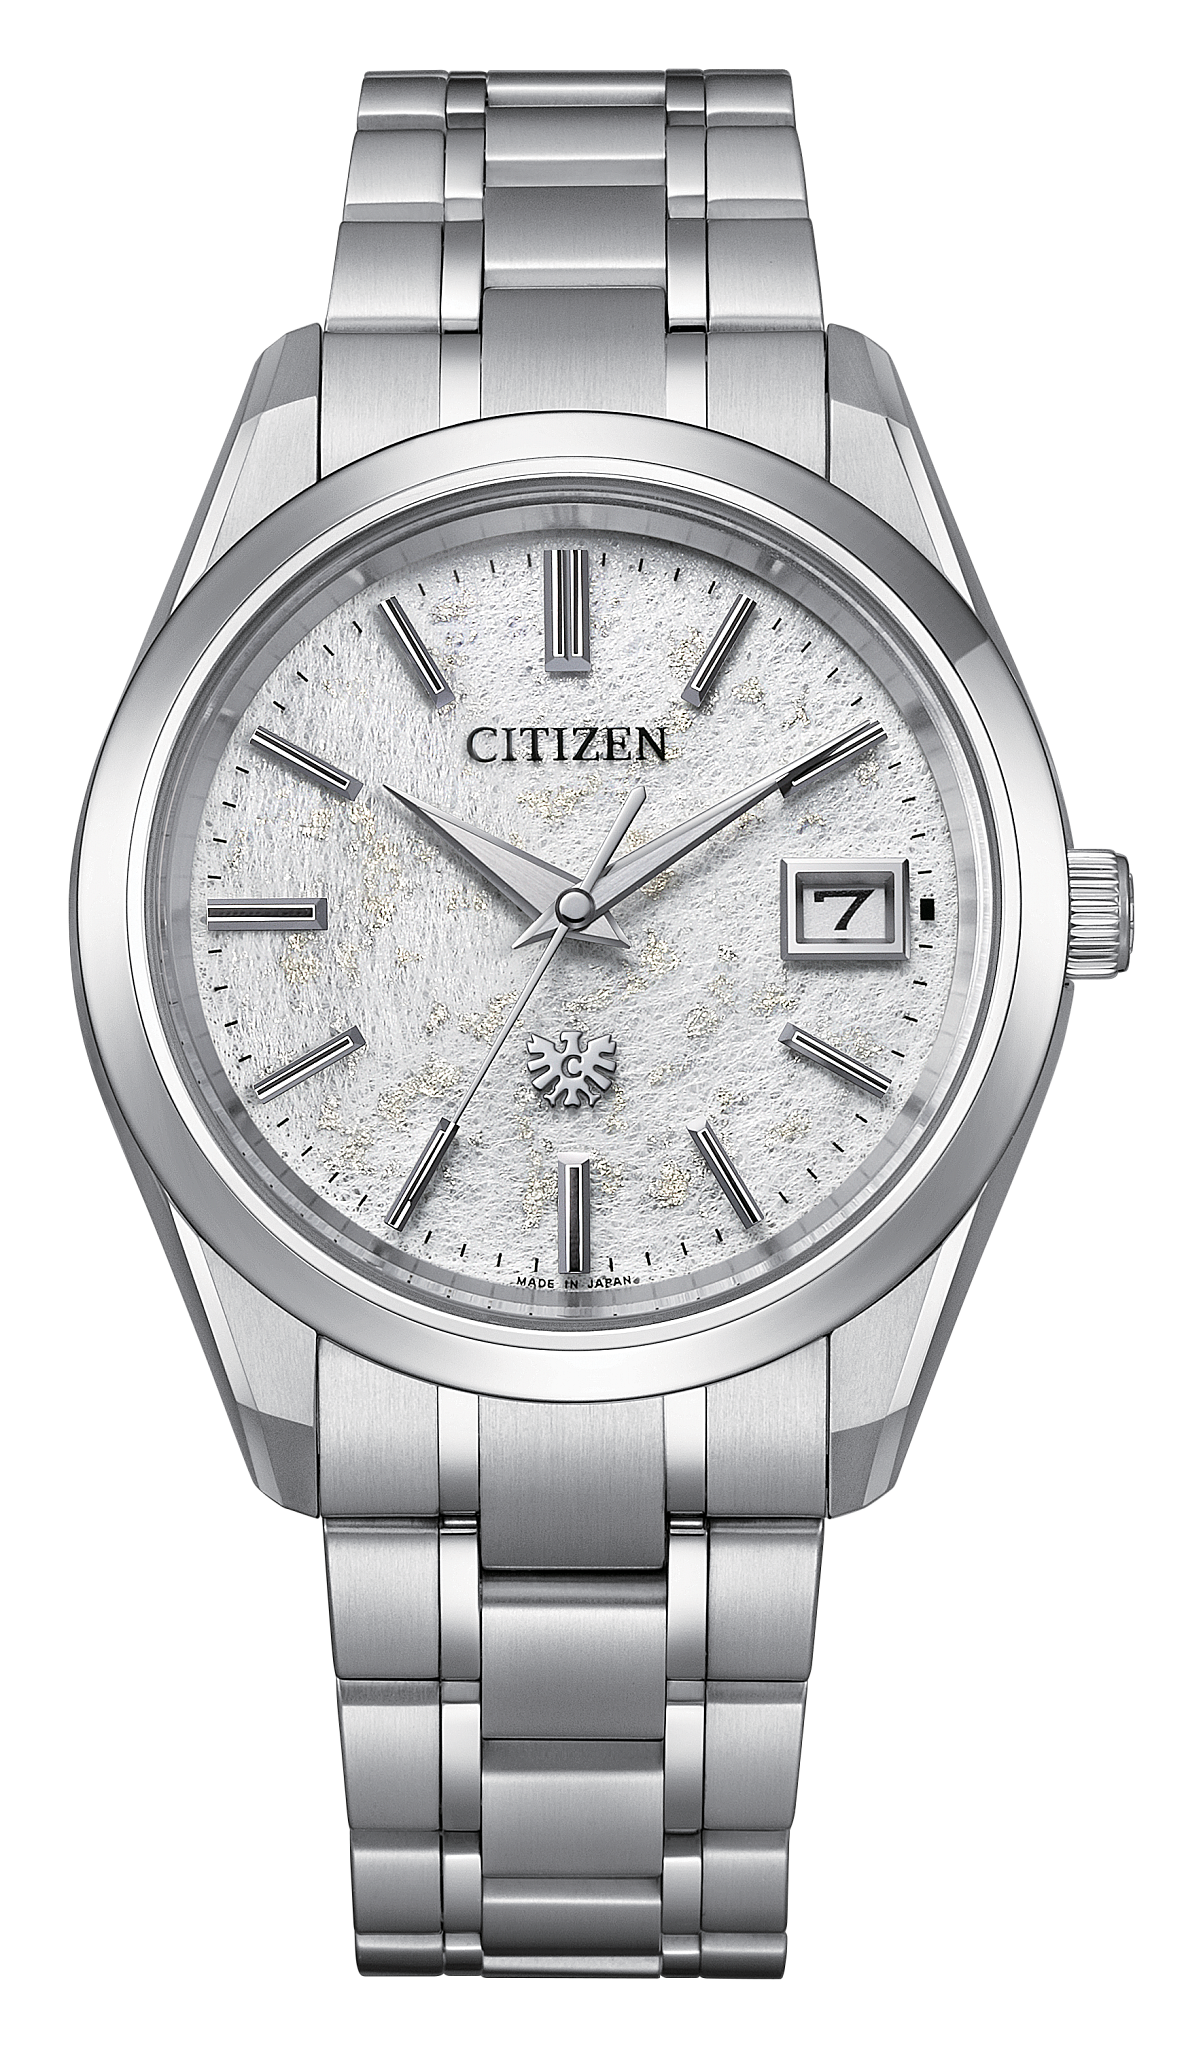 Round Citizen Quartz Analog Yellow Gold Dial Men Watch, Model Name/Number:  1112 S127505 at Rs 1500 in New Delhi